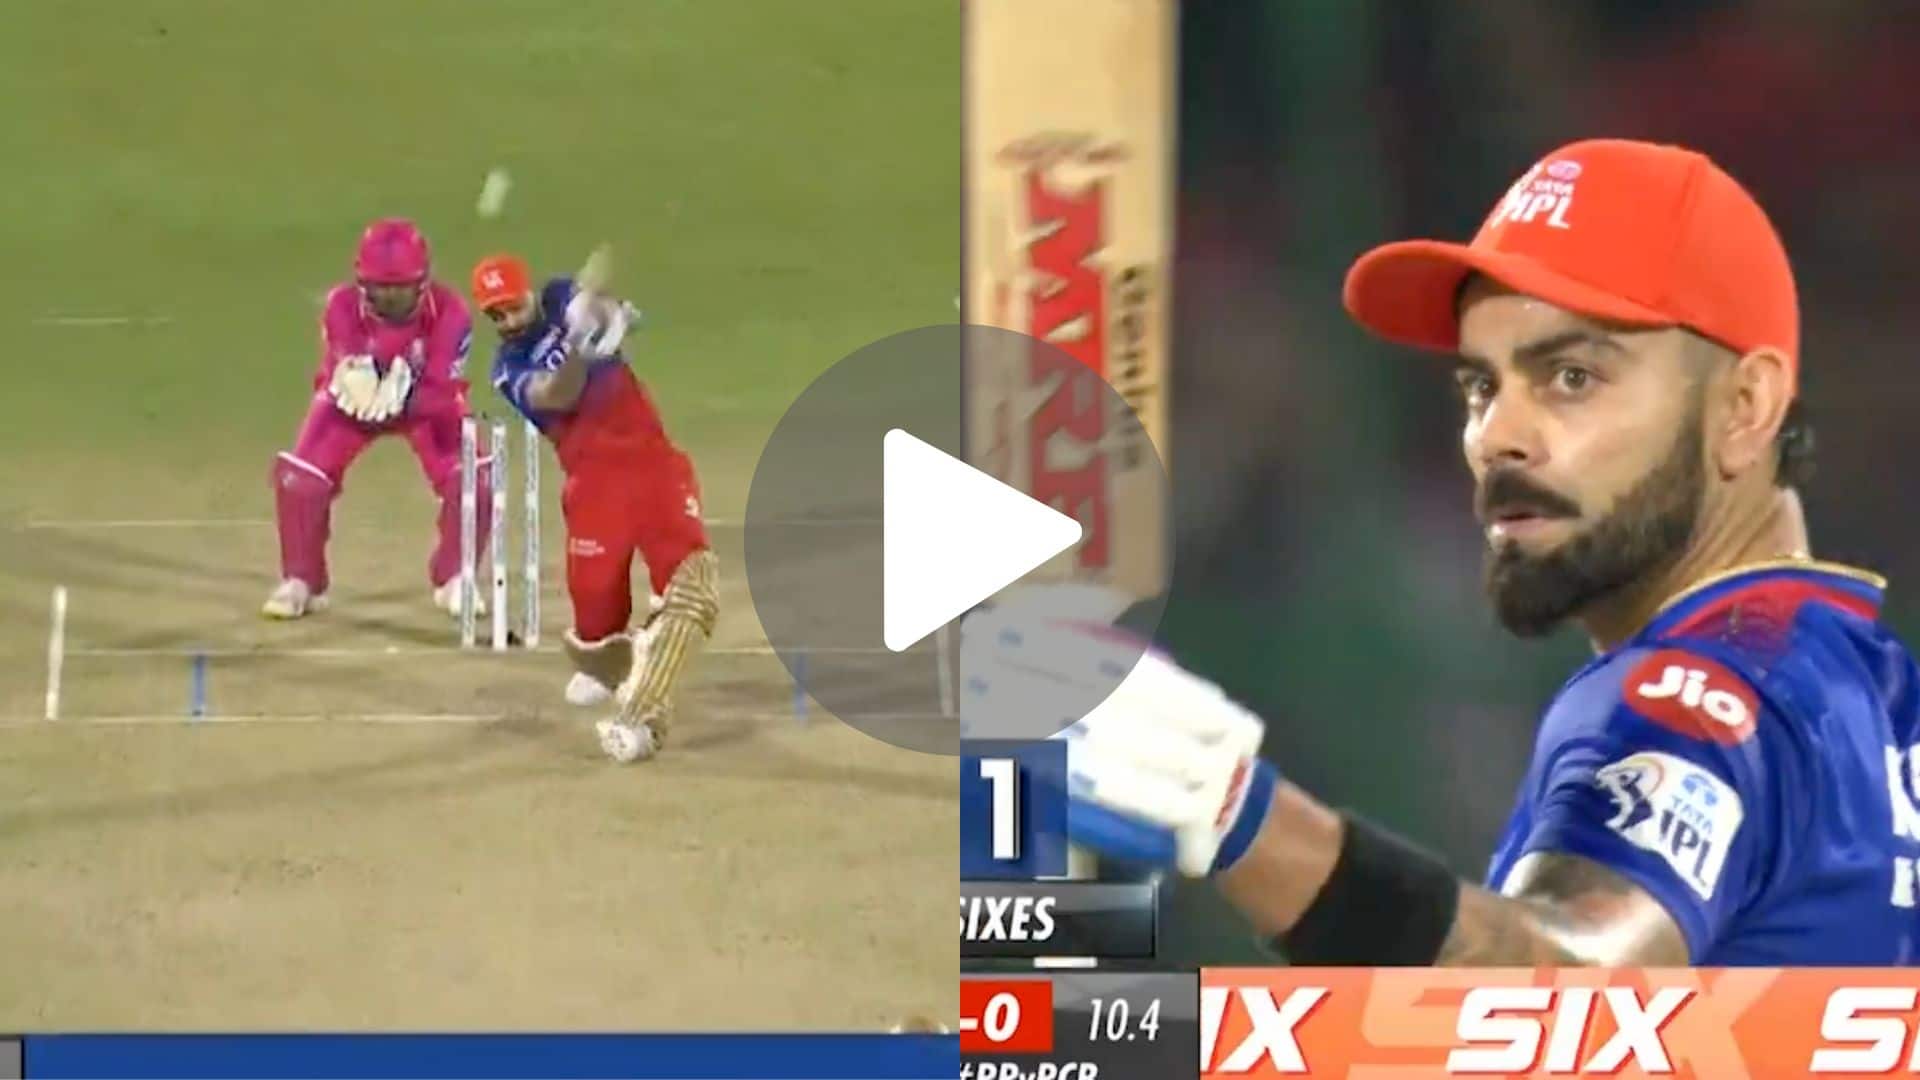 [Watch] Virat Kohli 'Pumped Up' As He Completes His Fifty With A Huge Six